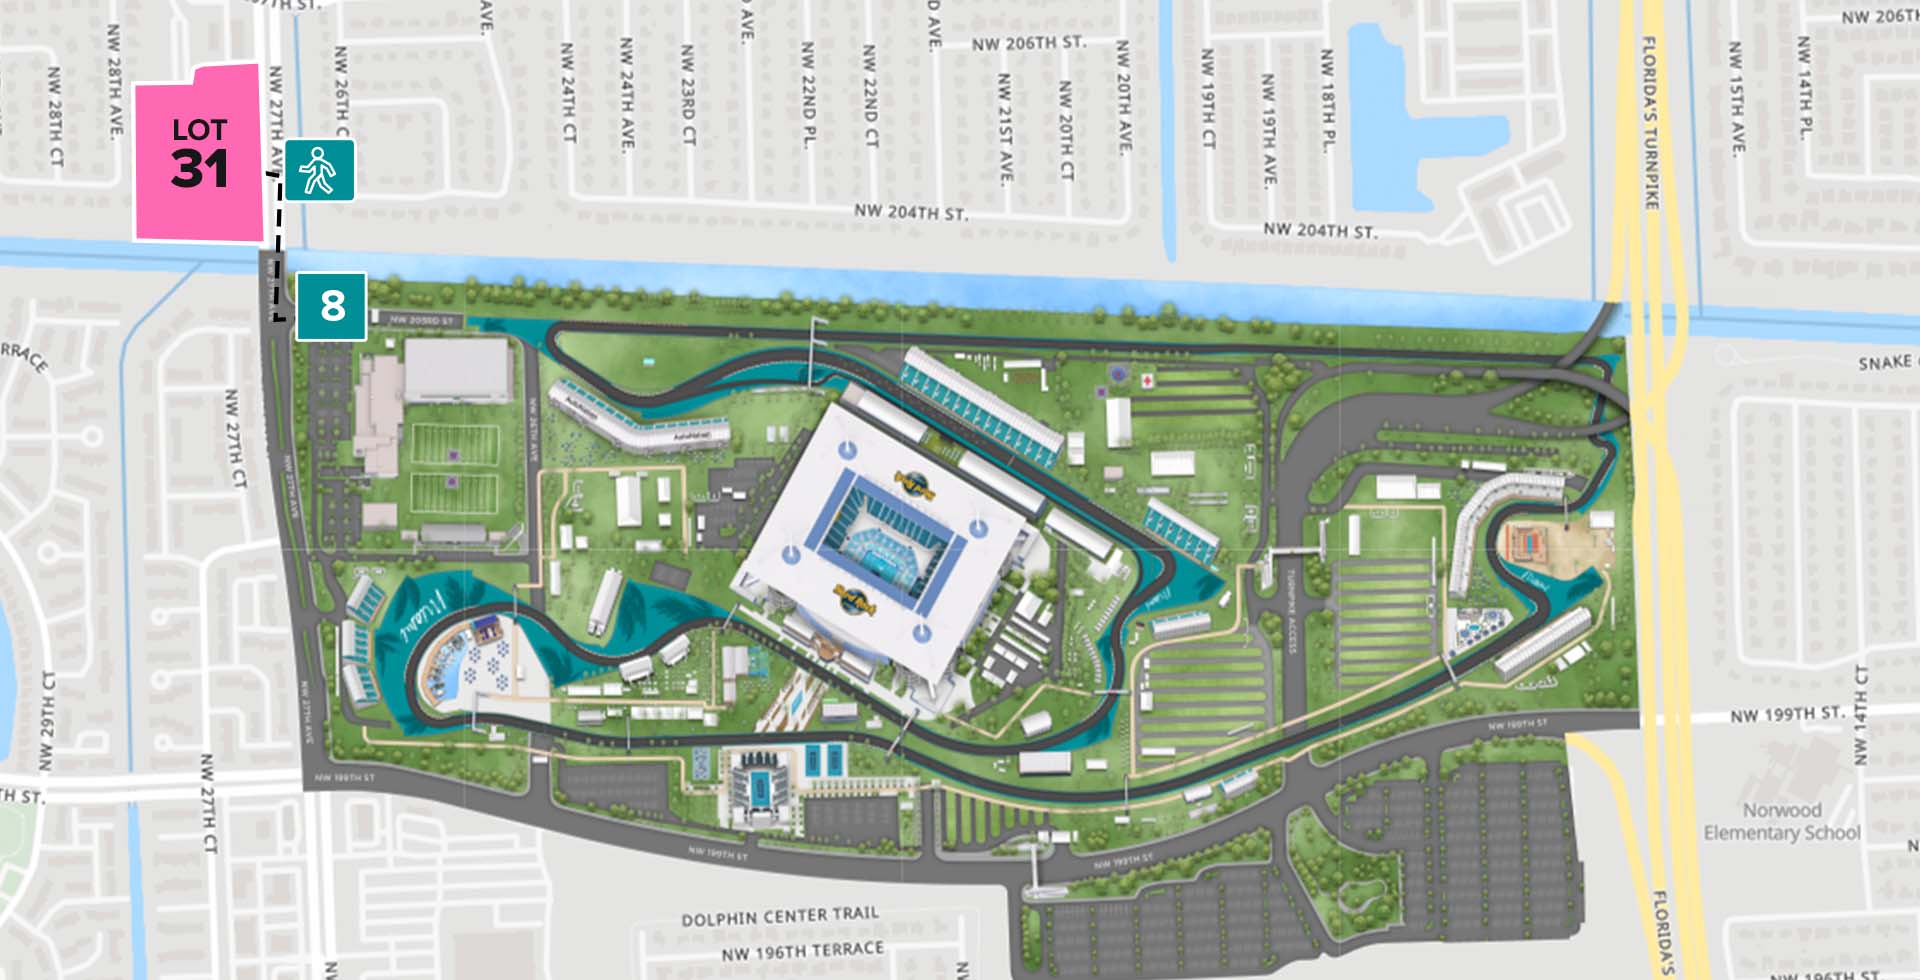 Parking Lot Location Map for Pink Lot 31 at the Formula 1 Crypto.com Miami Grand Prix